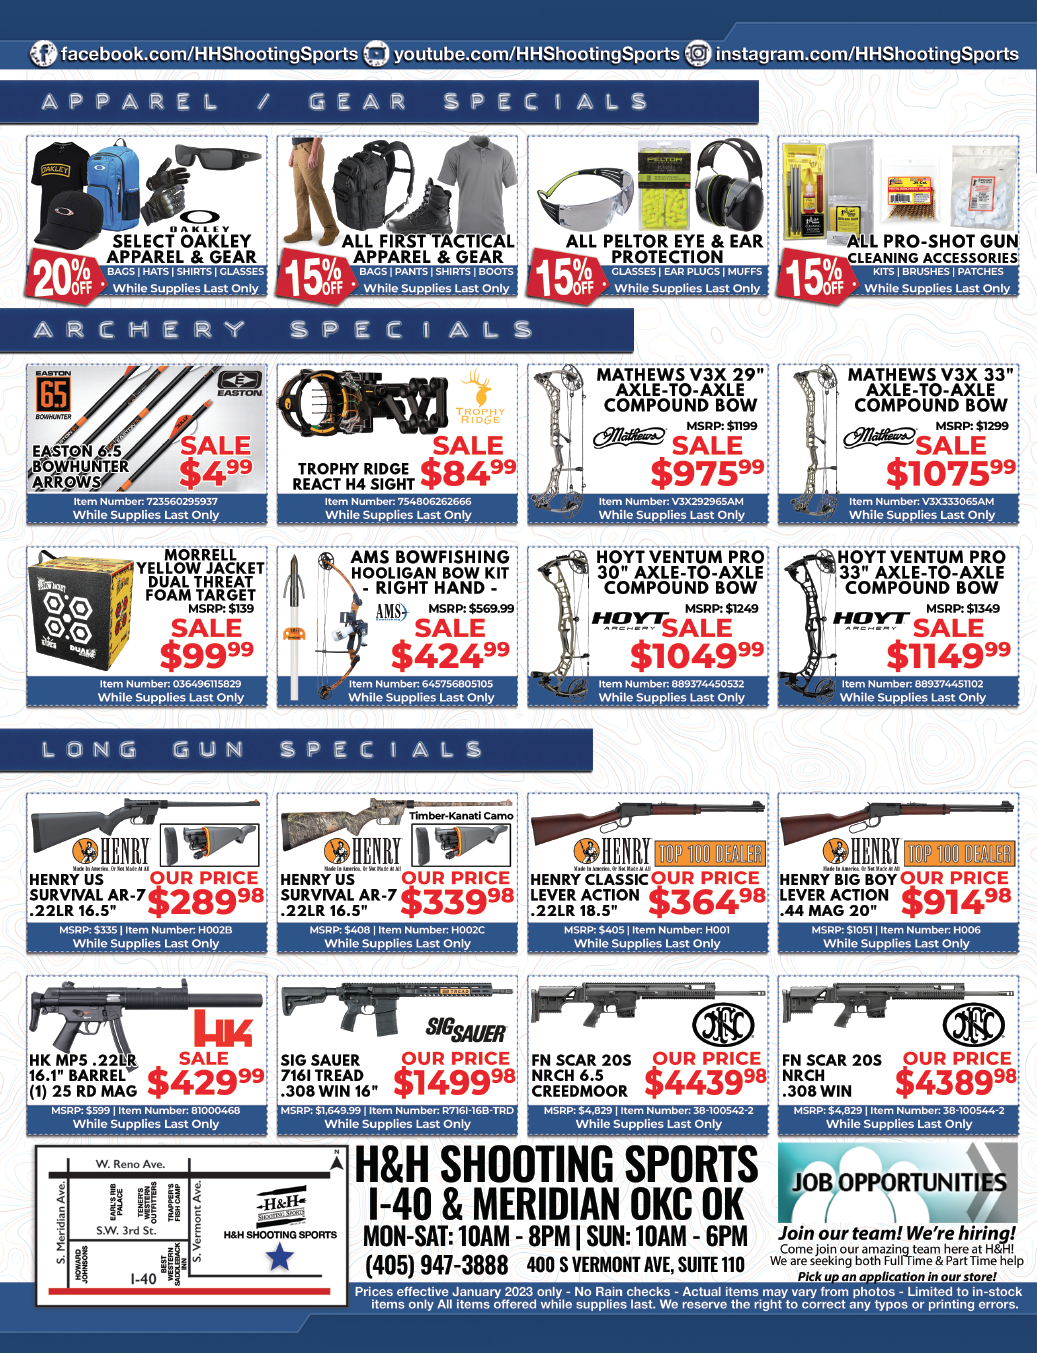 New Year New Deals - January 2023 Sales Event Page 4